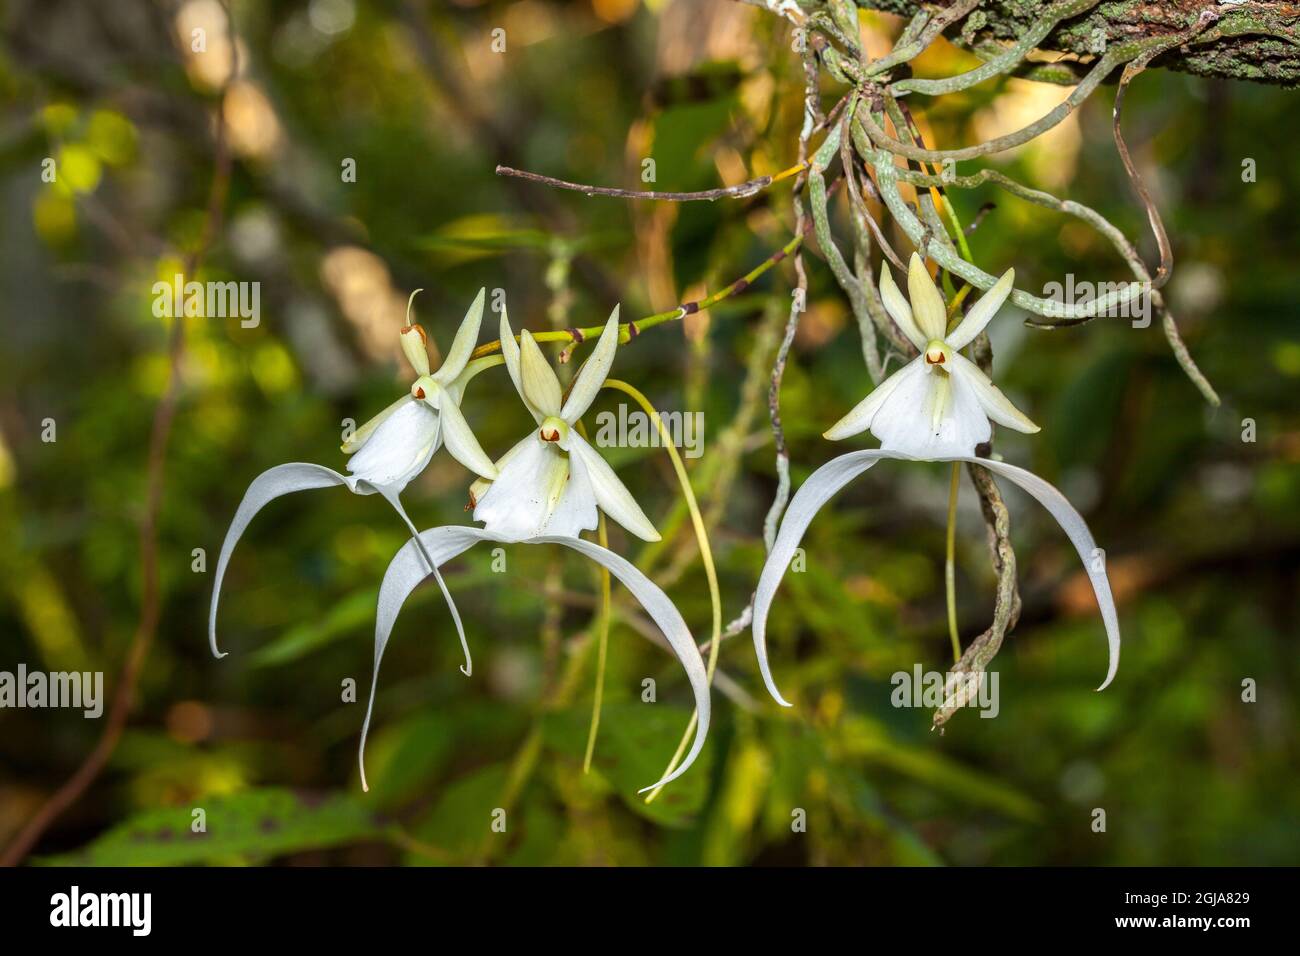 A rare Ghost orchid grows only in swamps in south Florida. Stock Photo